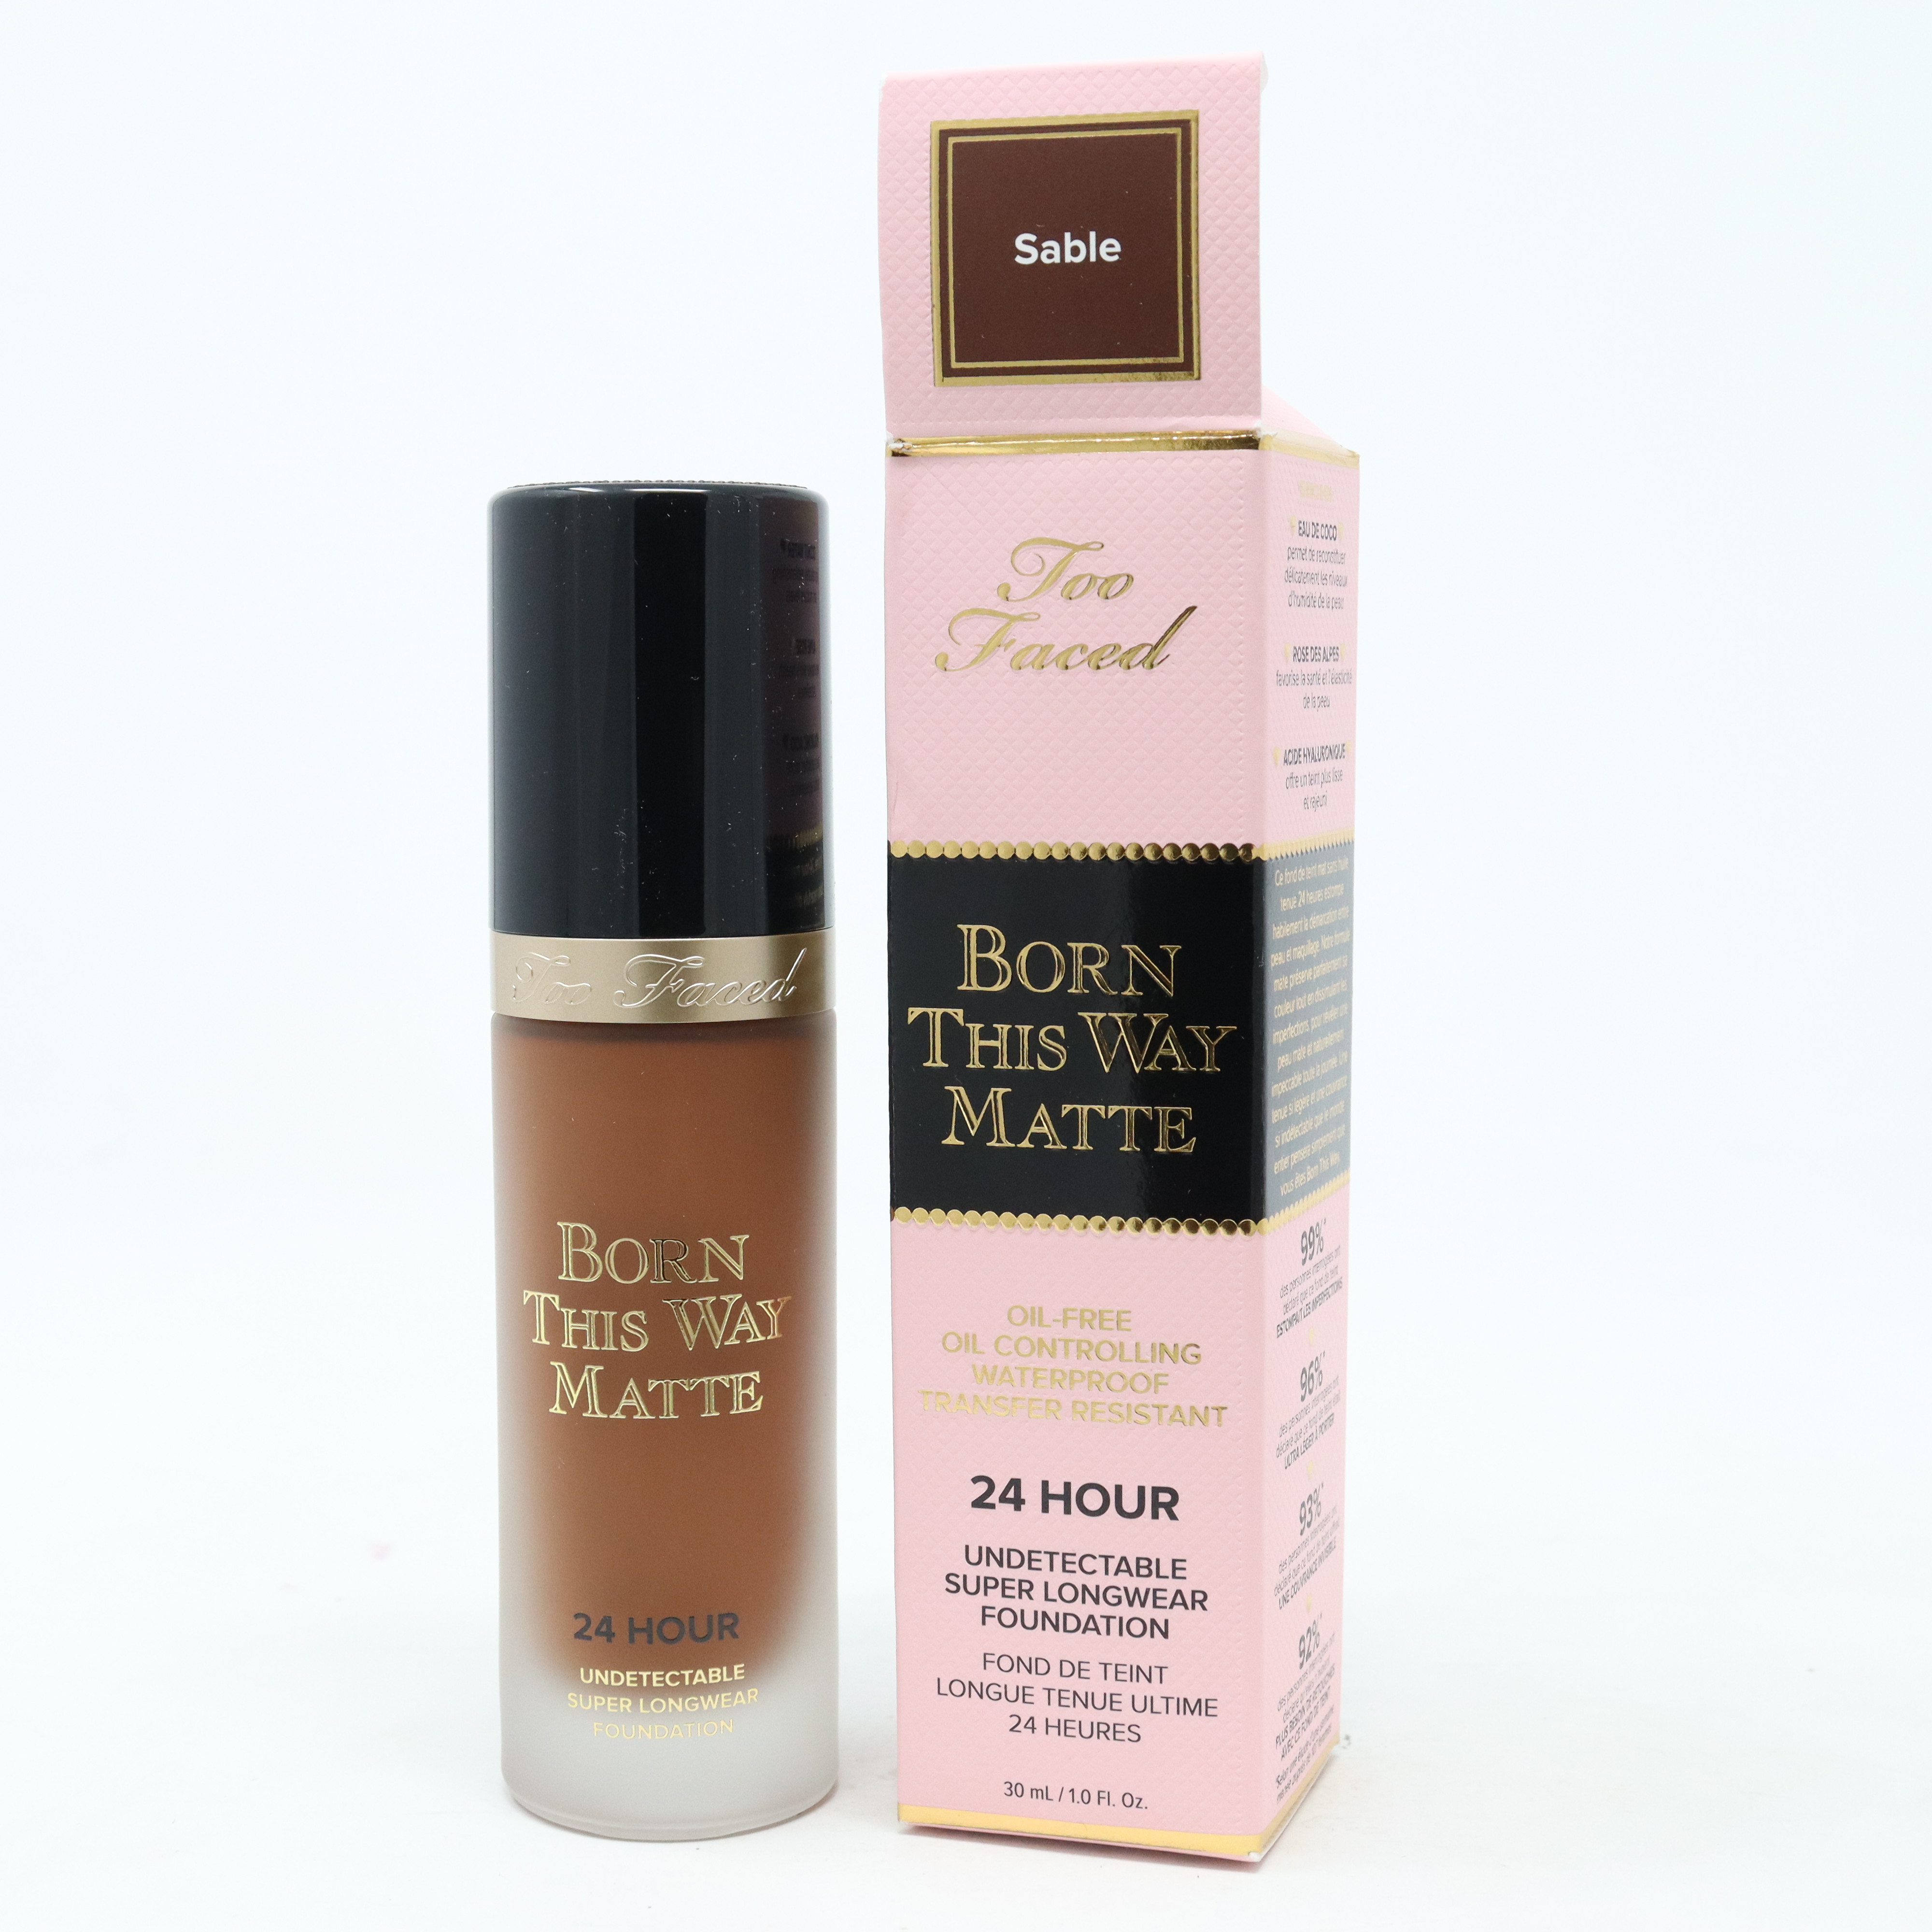 Too Faced Born This Way Matte 24 Hour Foundation 1.0oz/30ml New With Box |  eBay